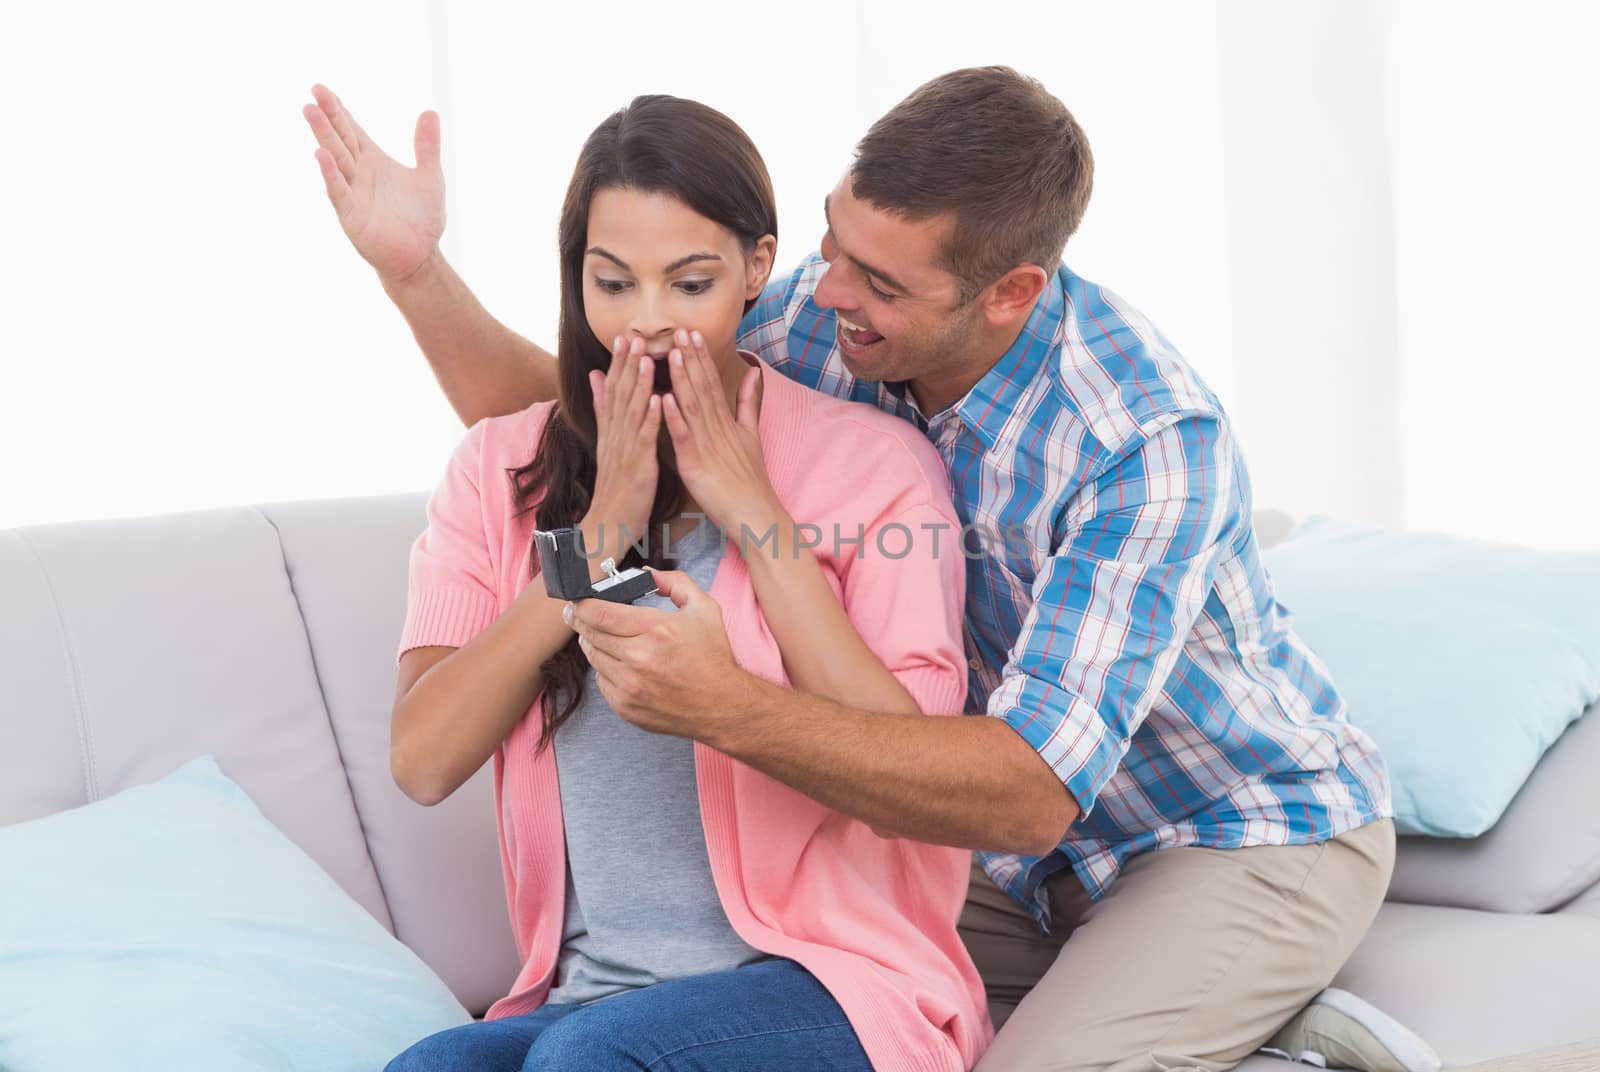 Man gifting ring to surprised woman on sofa by Wavebreakmedia